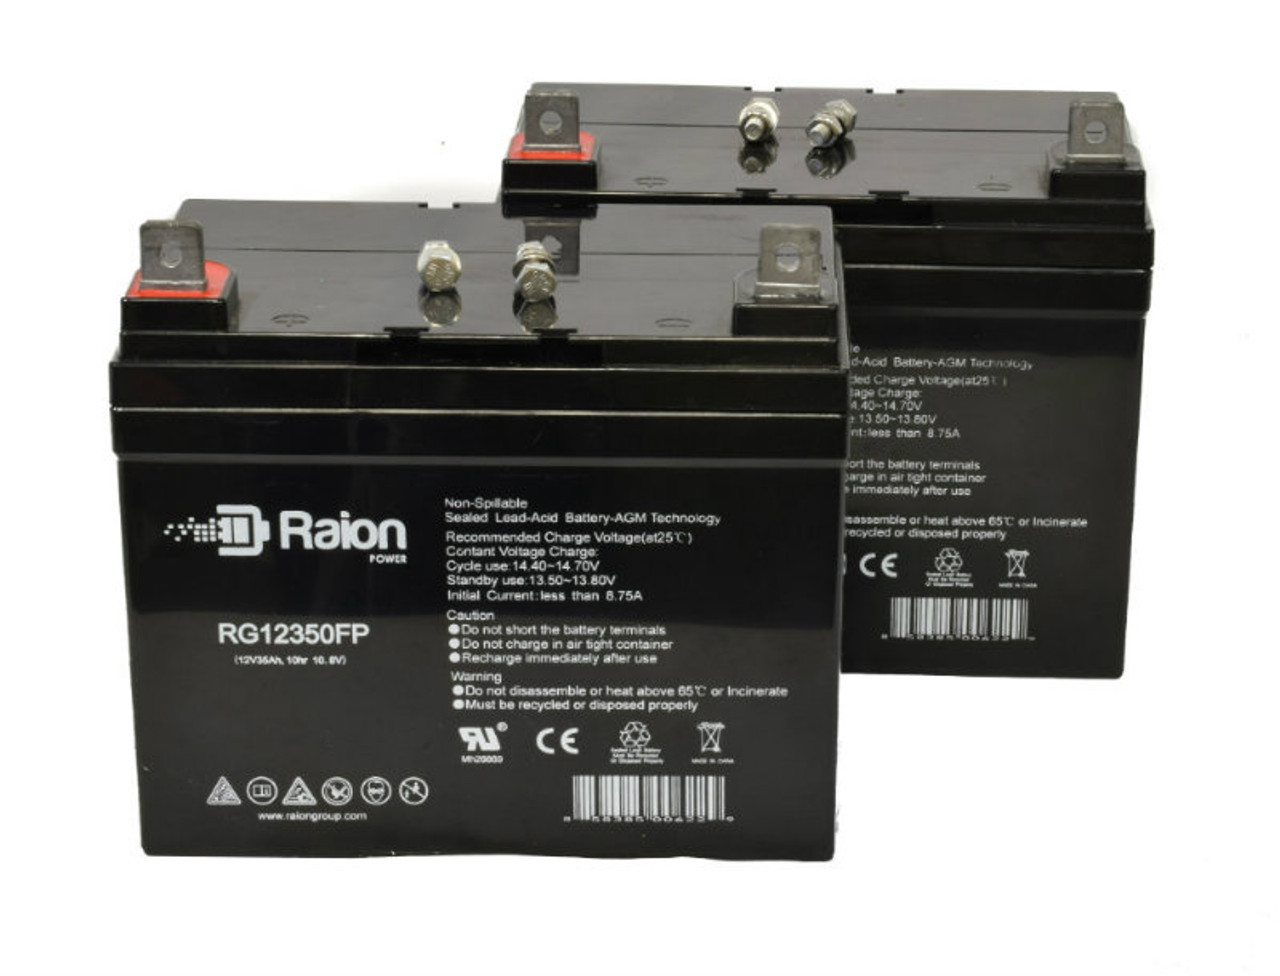 Raion Power Replacement 12V 35Ah Lawn Mower Battery for J.I. Case & Case Ih Lawn 220 - 2 Pack